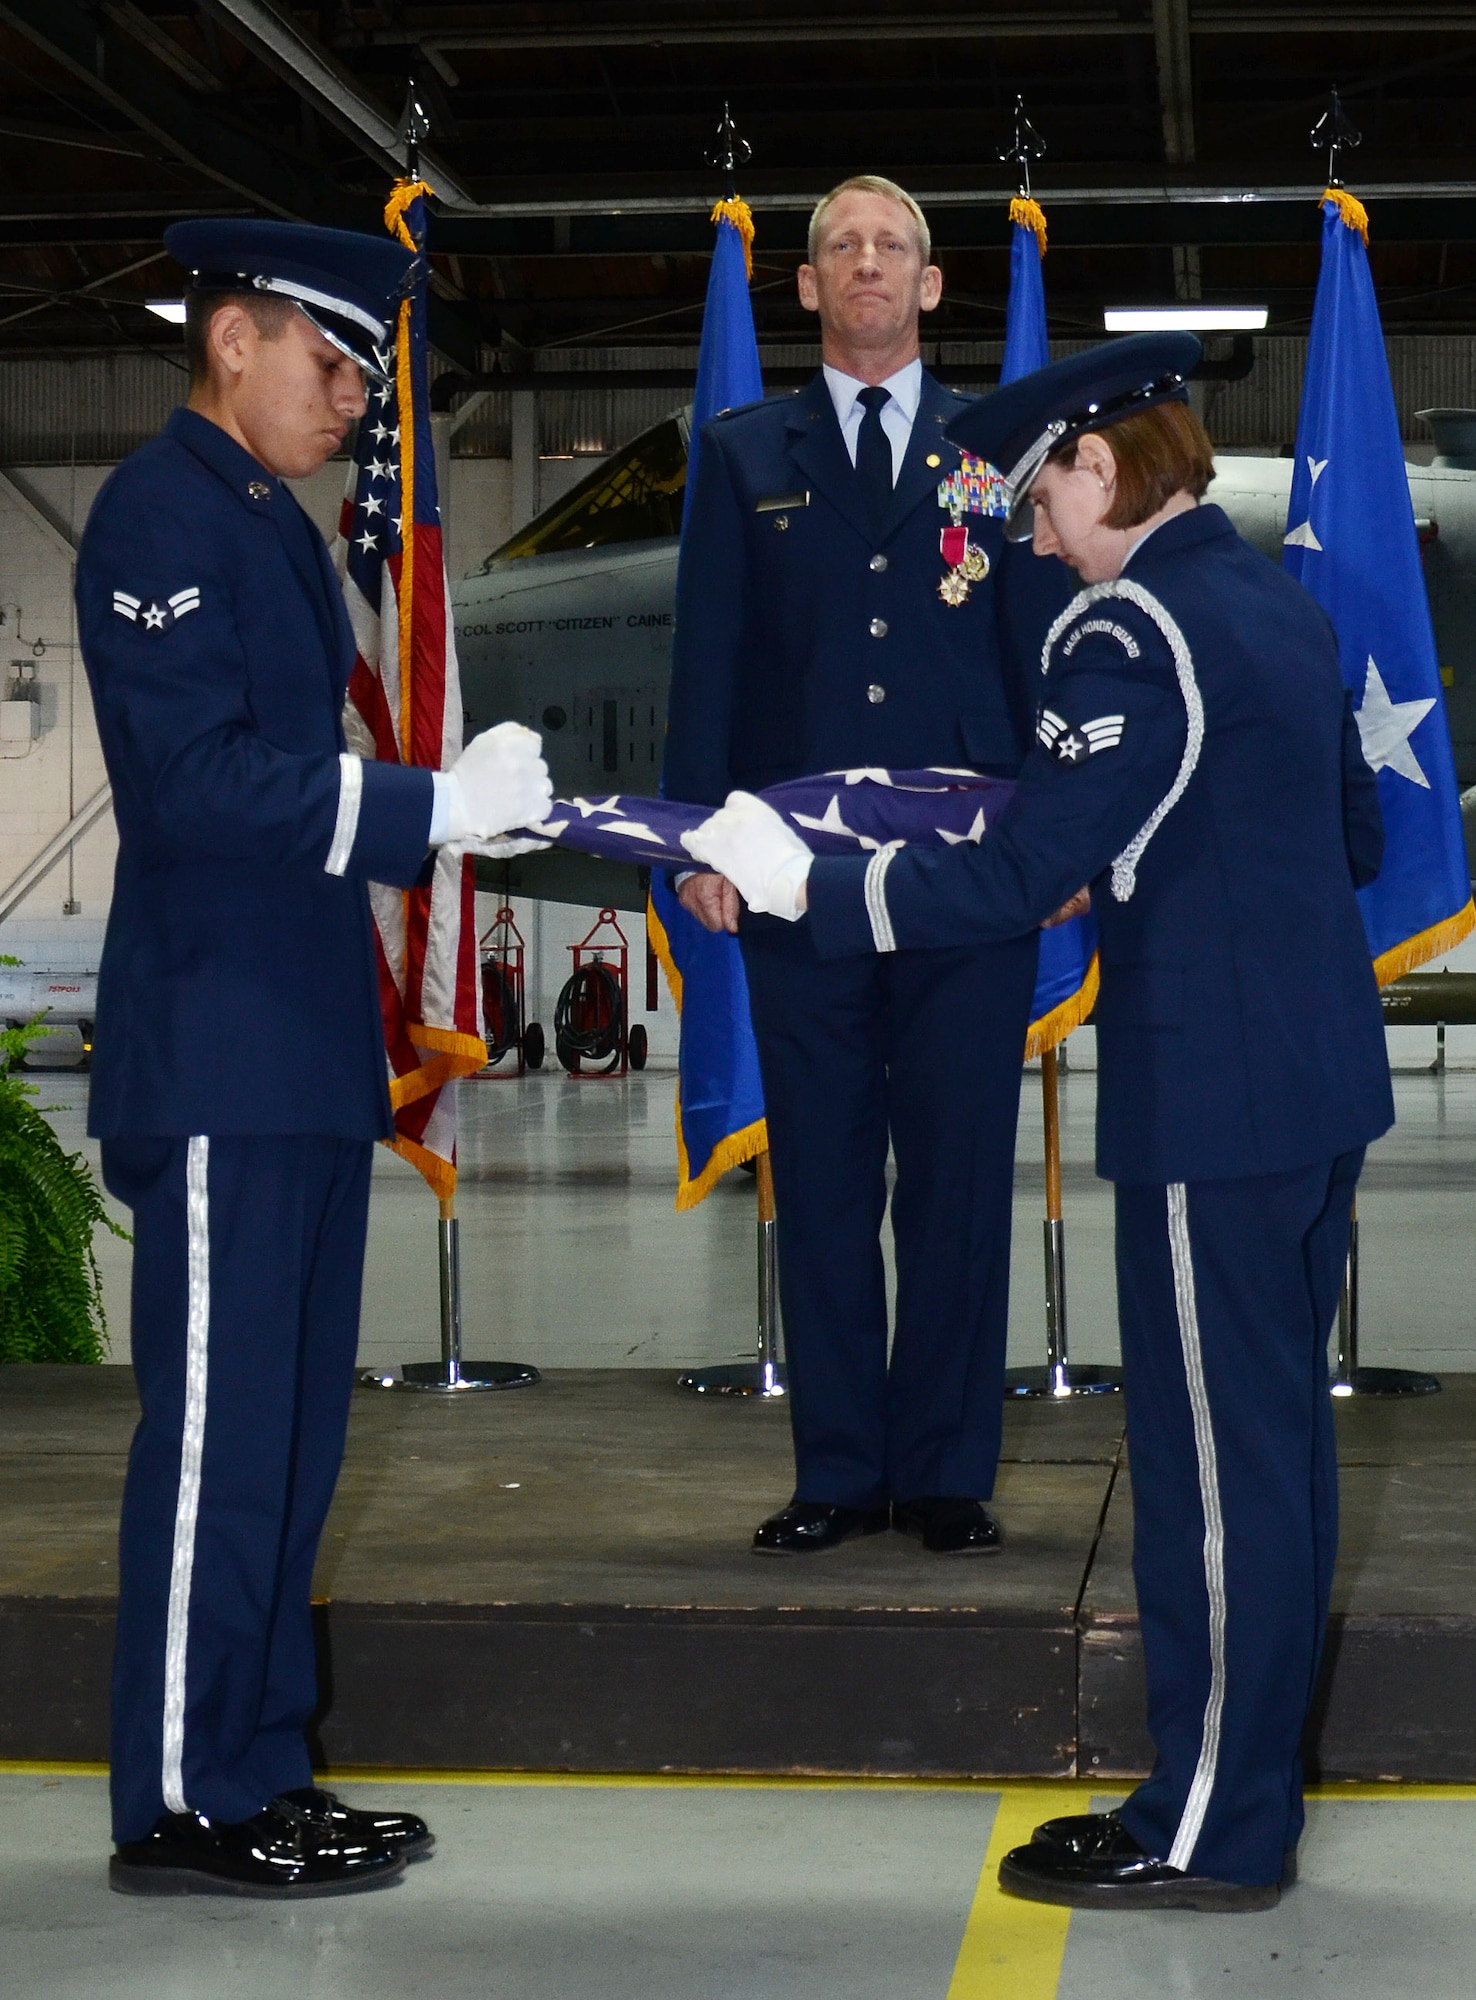 U.S. Air Force Col. Scott Caine (center), 9th Air Force vice commander, stands at attention Airman 1st Class Michael De La Cruz (left) and Senior Airman Caytlin Shreve (right), Shaw Air Force Base Honor Guard ceremonial guardsmen, fold the American Flag during Caine’s retirement ceremony, Shaw AFB, S.C., Feb. 10, 2017. As part of the ceremony, the American Flag was displayed and refolded to show respect and gratitude toward those who have fought and continue to fight for freedom. (U.S. Air Force photo by Tech. Sgt. Amanda Dick)